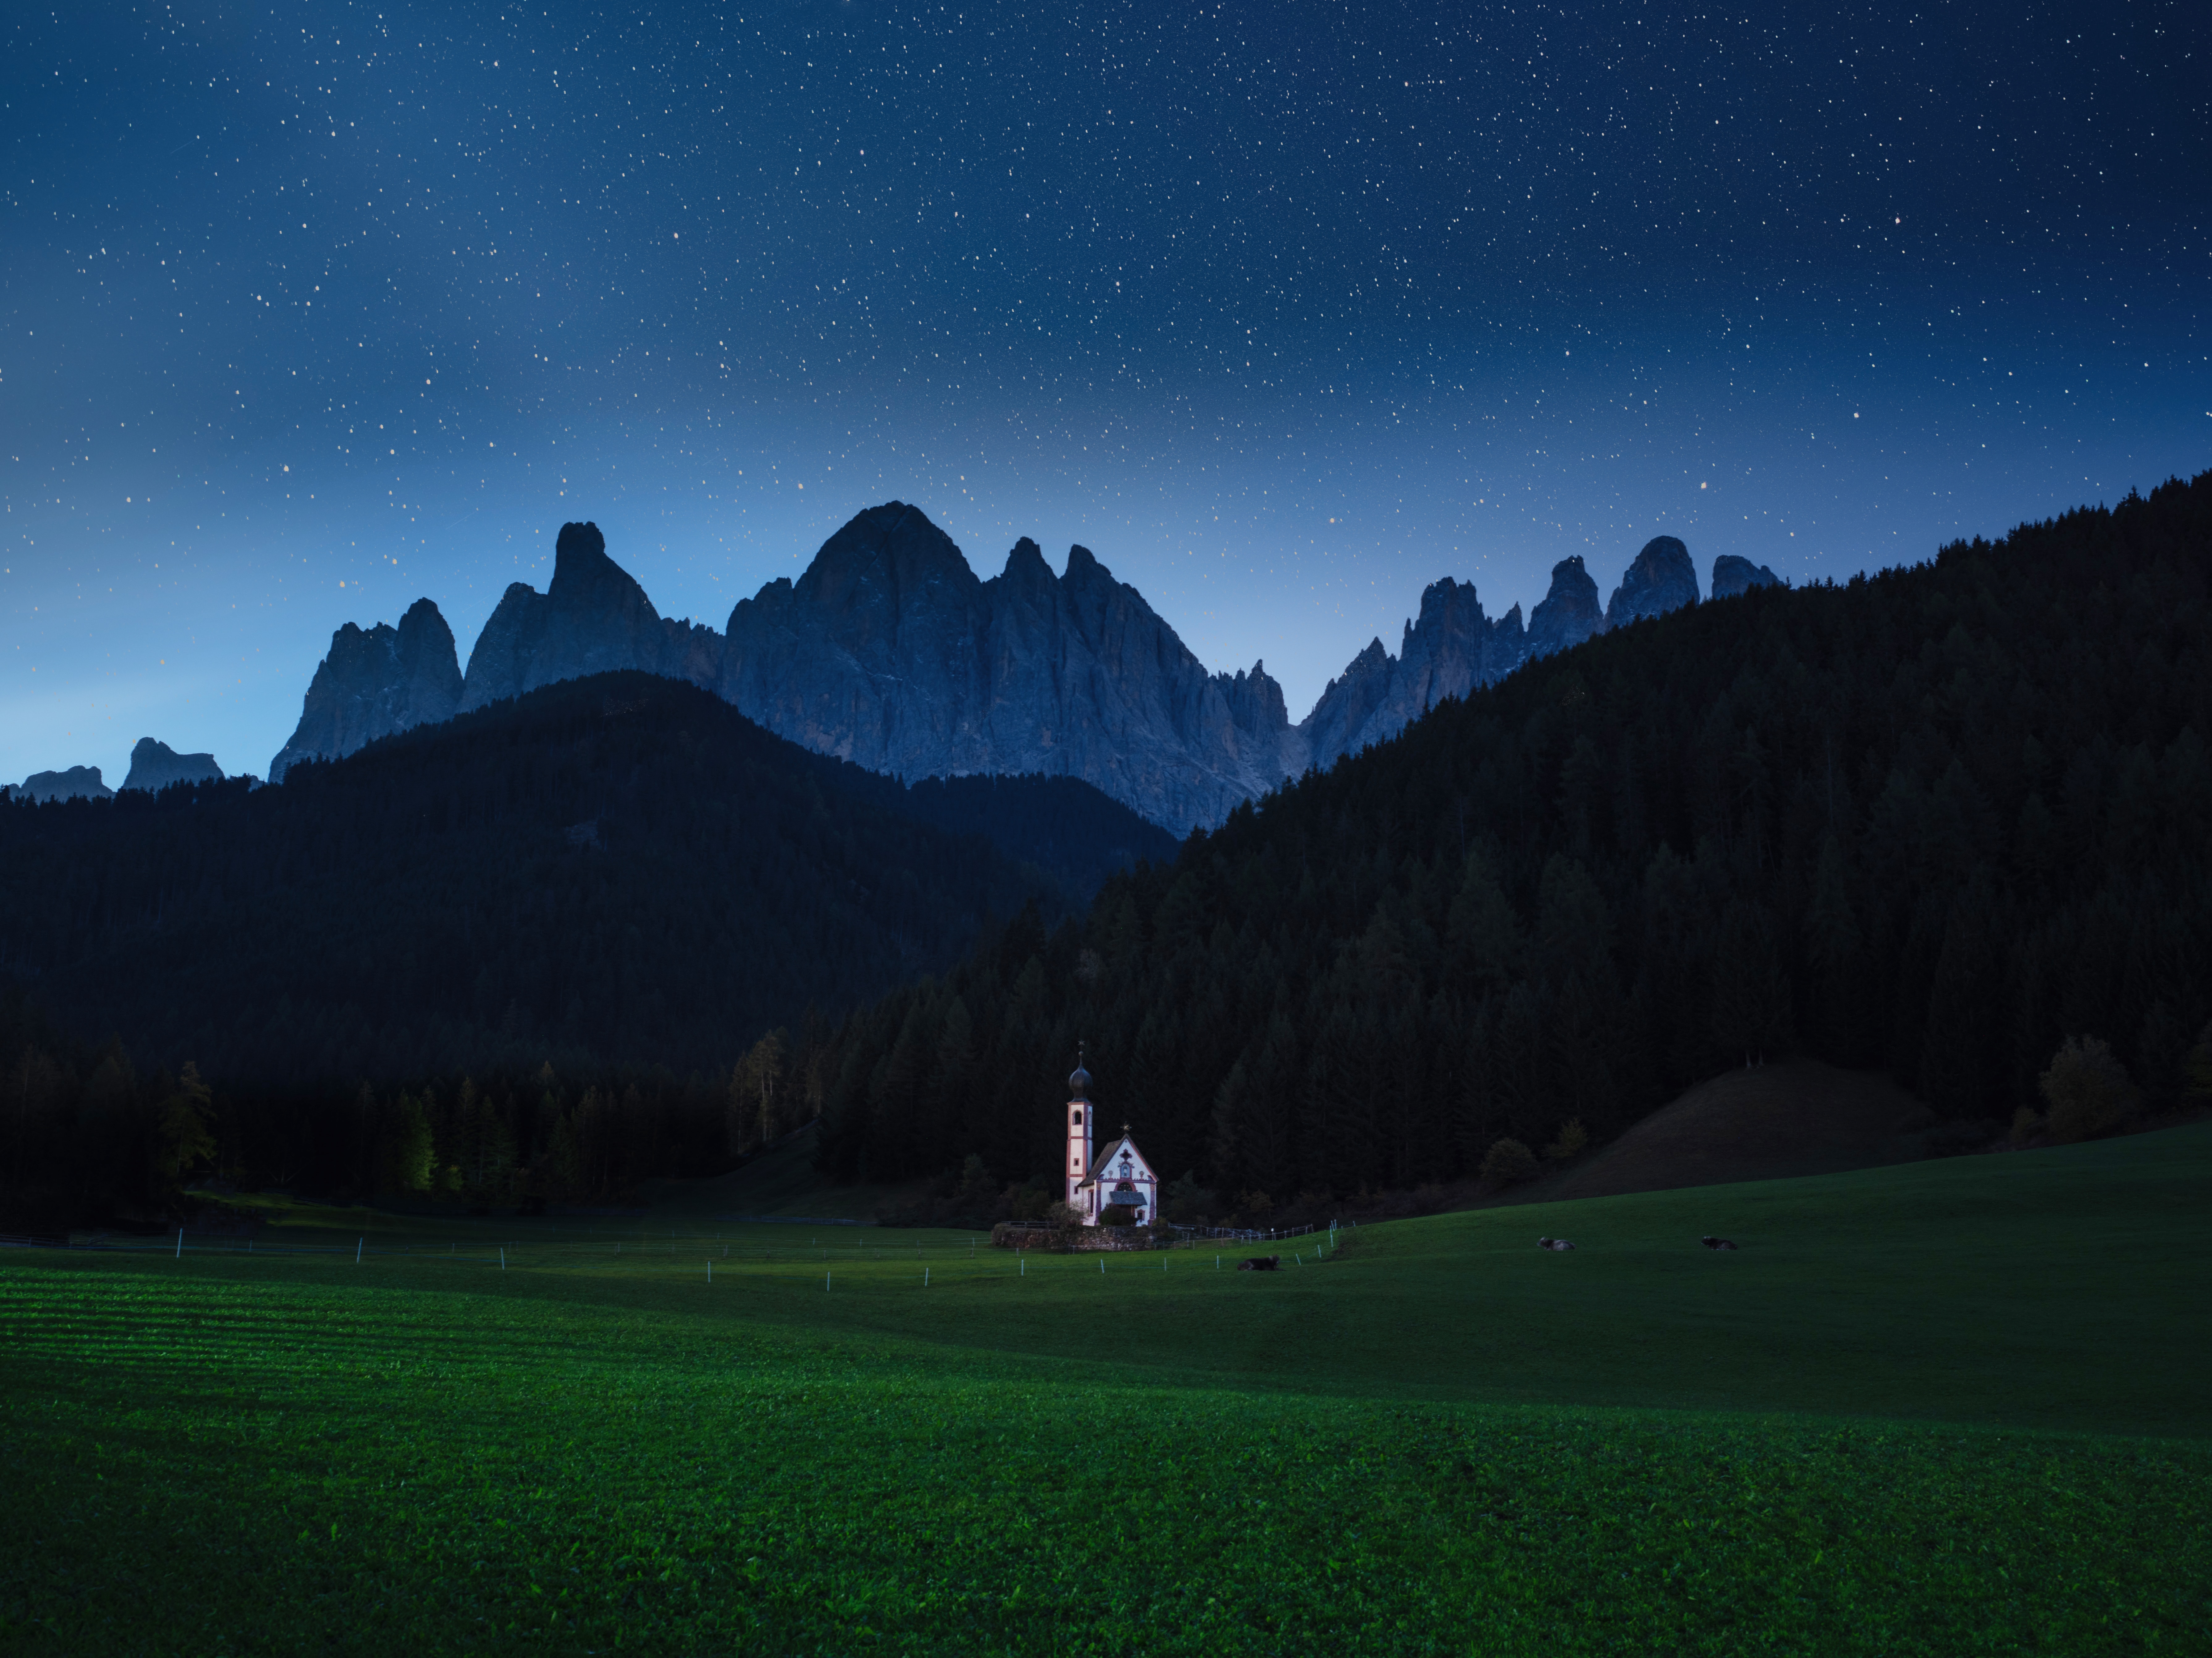 108688 download wallpaper landscape, nature, mountains, night, building, lawn screensavers and pictures for free